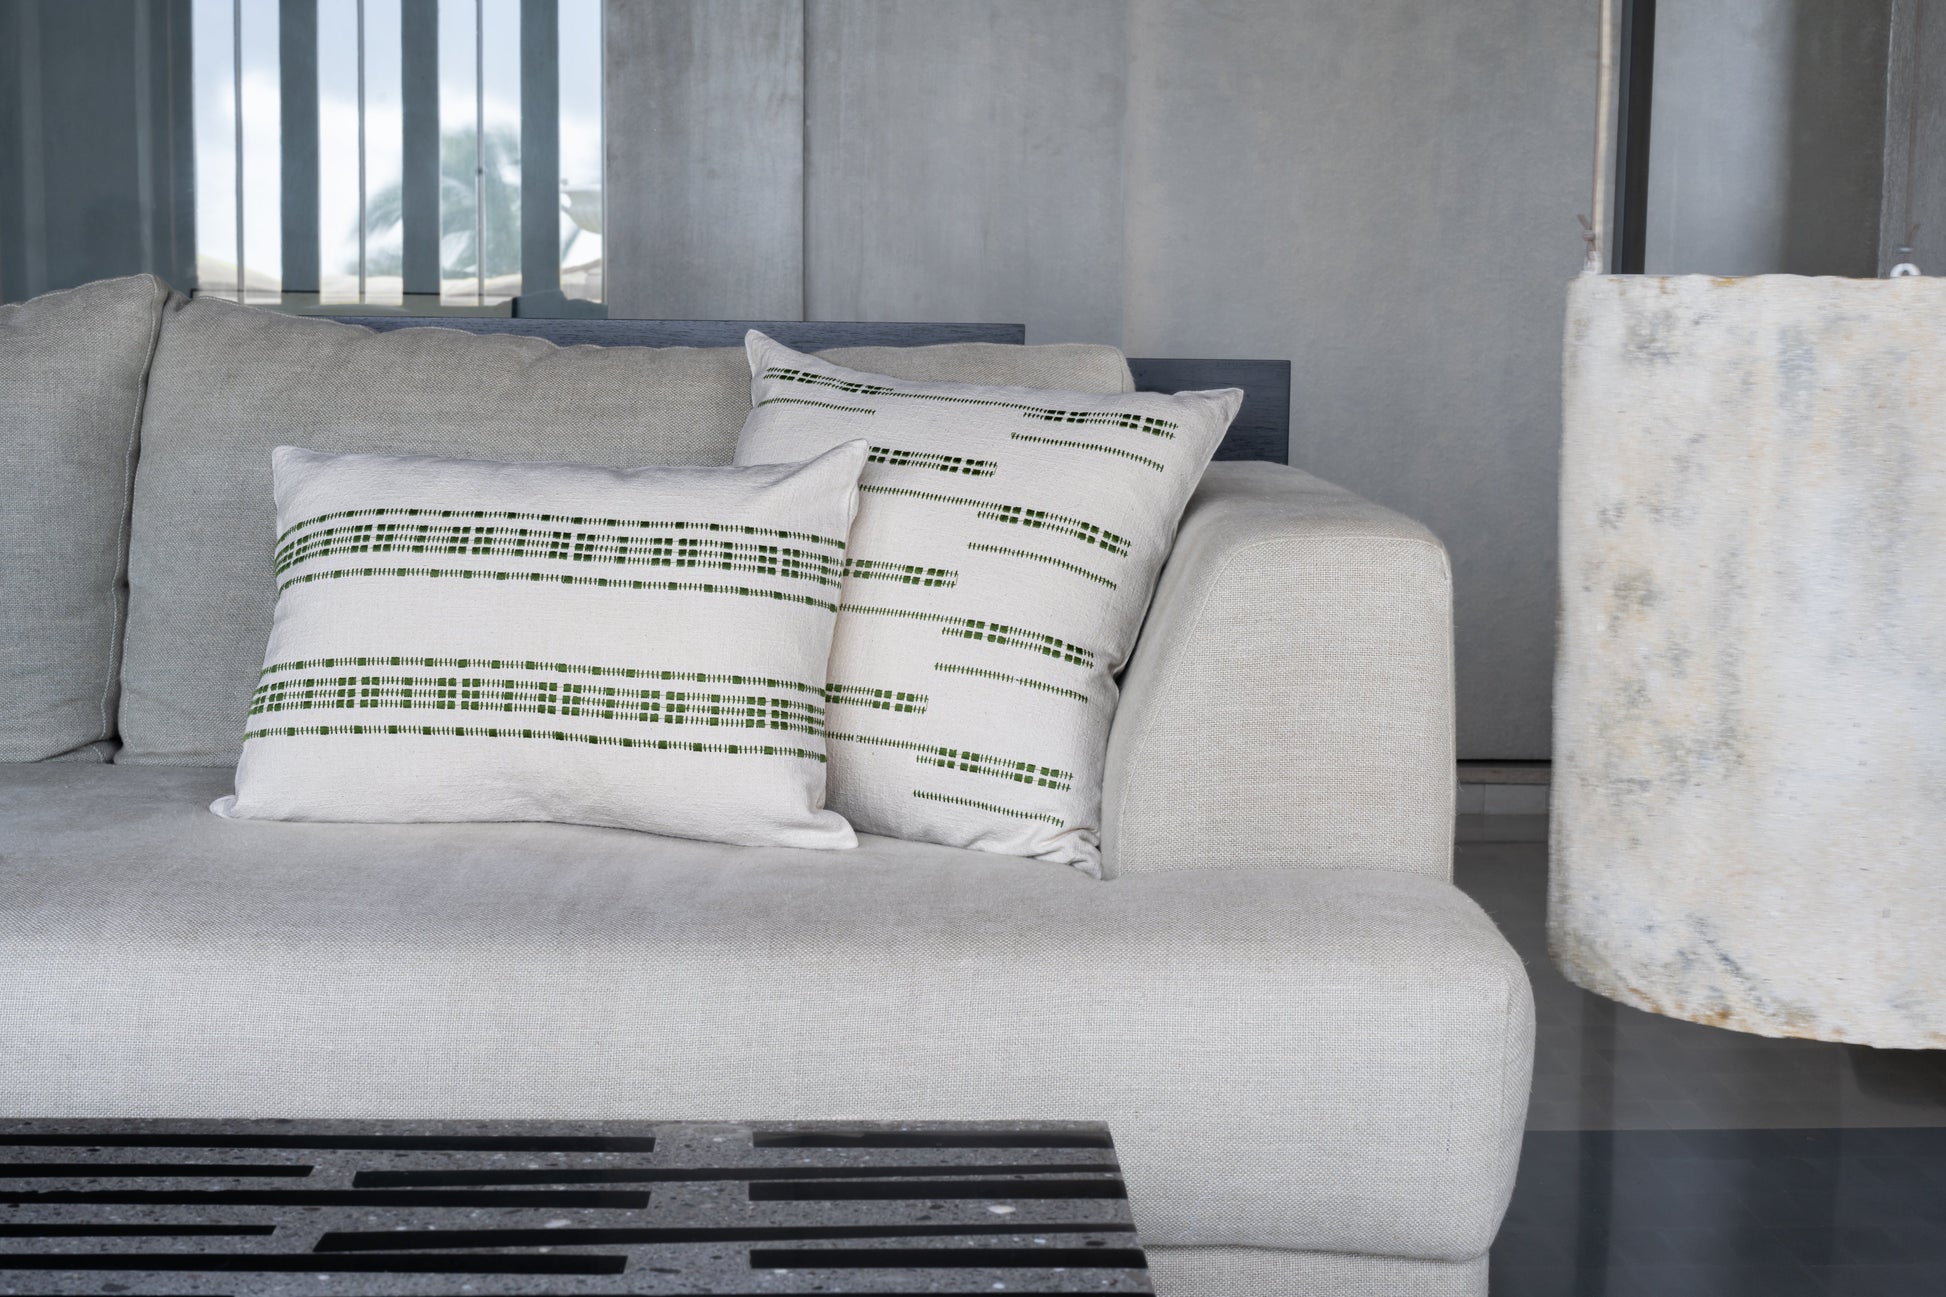 Green embroidered cotton lumbar cushion cover placed next to a green embroidered cotton cushion cover on a couch